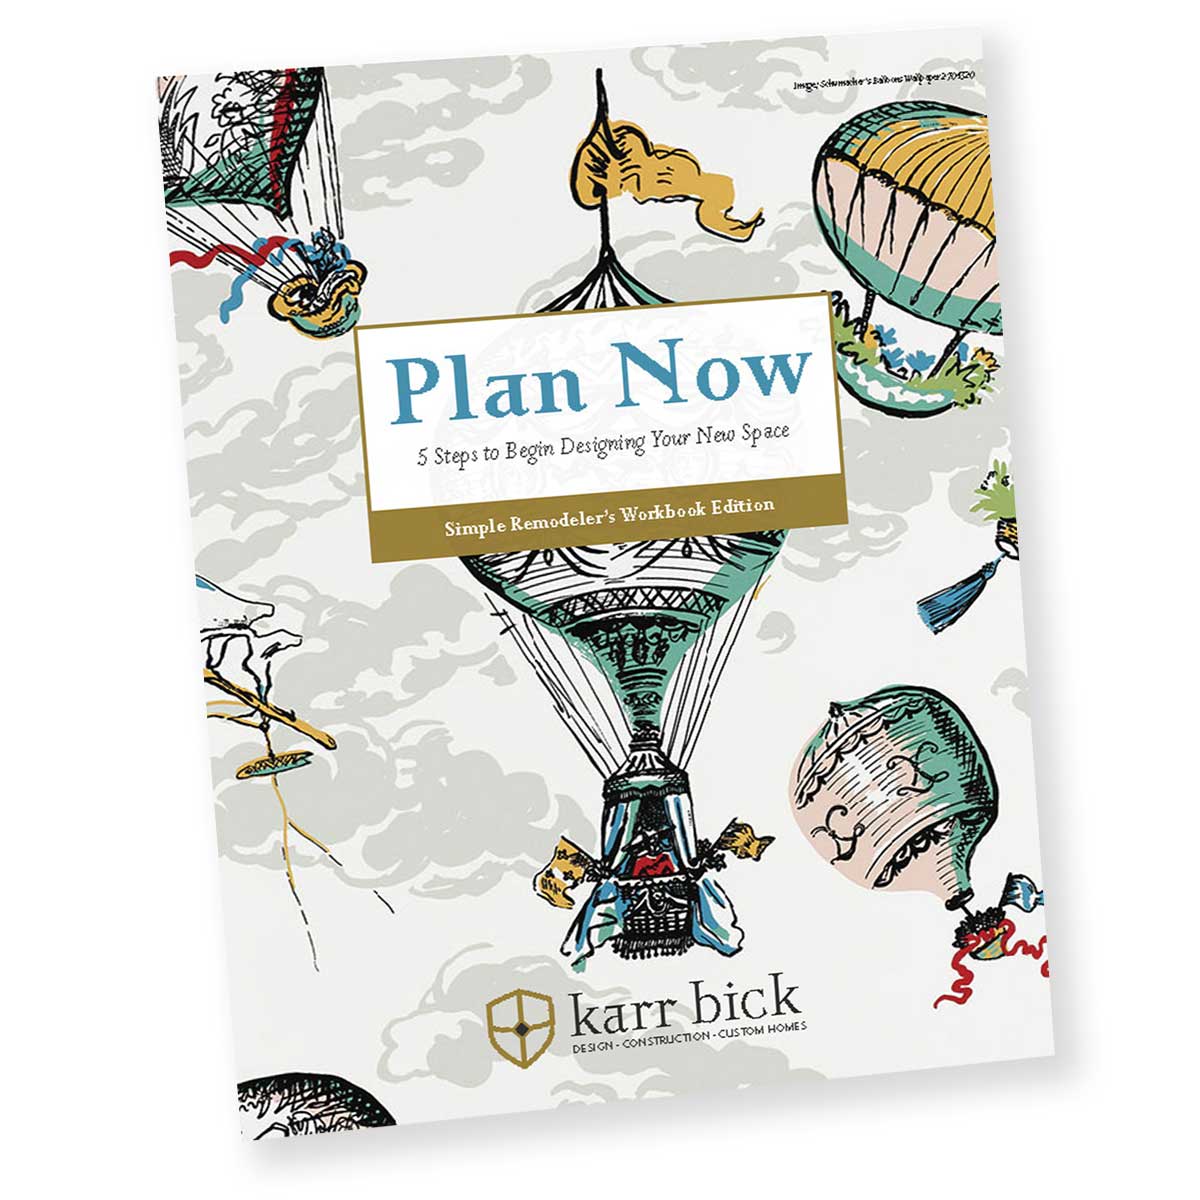 Cover of Karr Bick's book, "Plan Now, 5 steps to begin designing your new space"